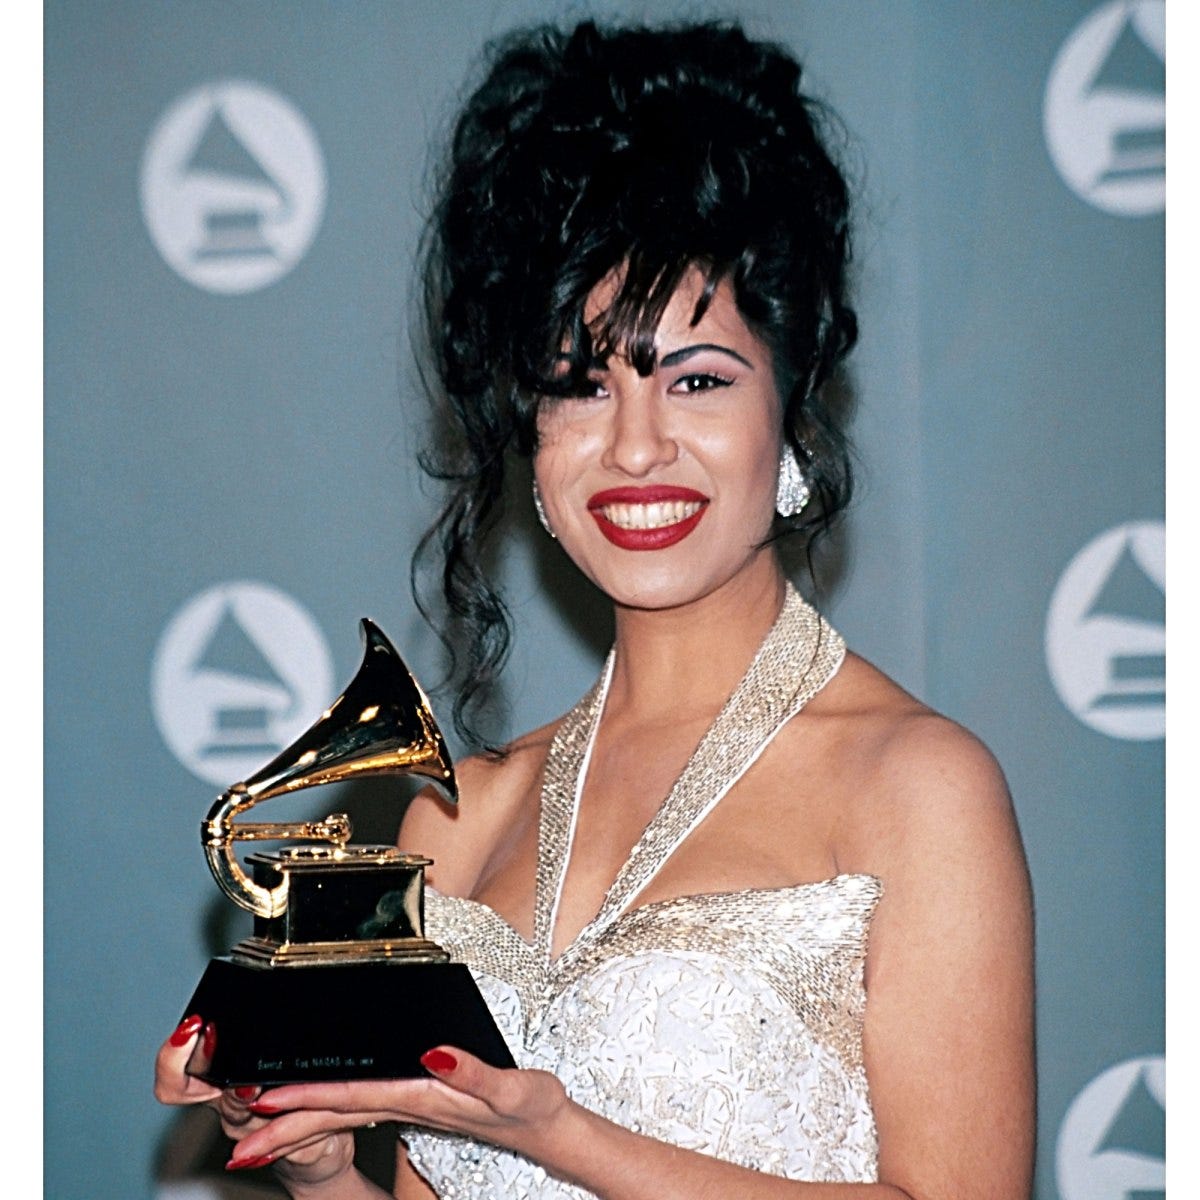 Selena on a red carpet holding a Grammy award